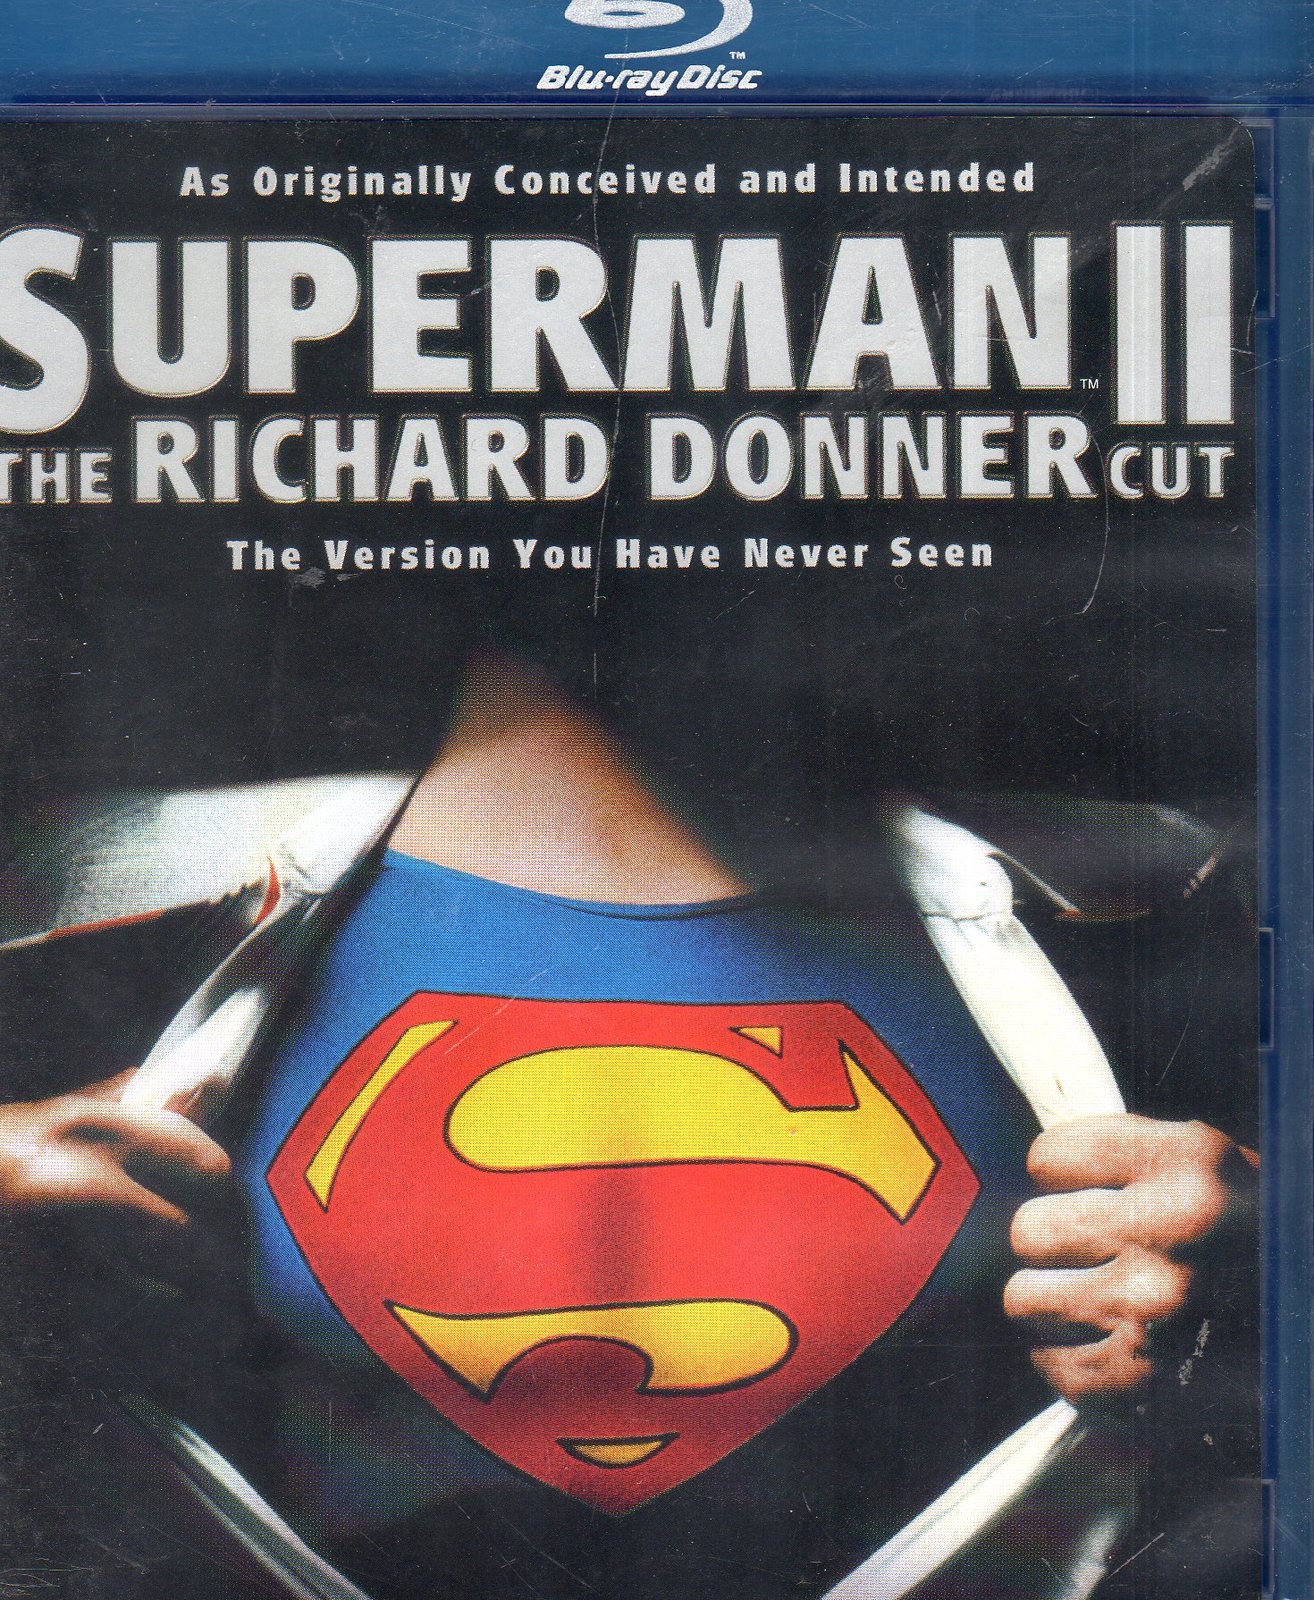 Primary image for Superman II (The Richard Donner Cut) [Blu-ray]